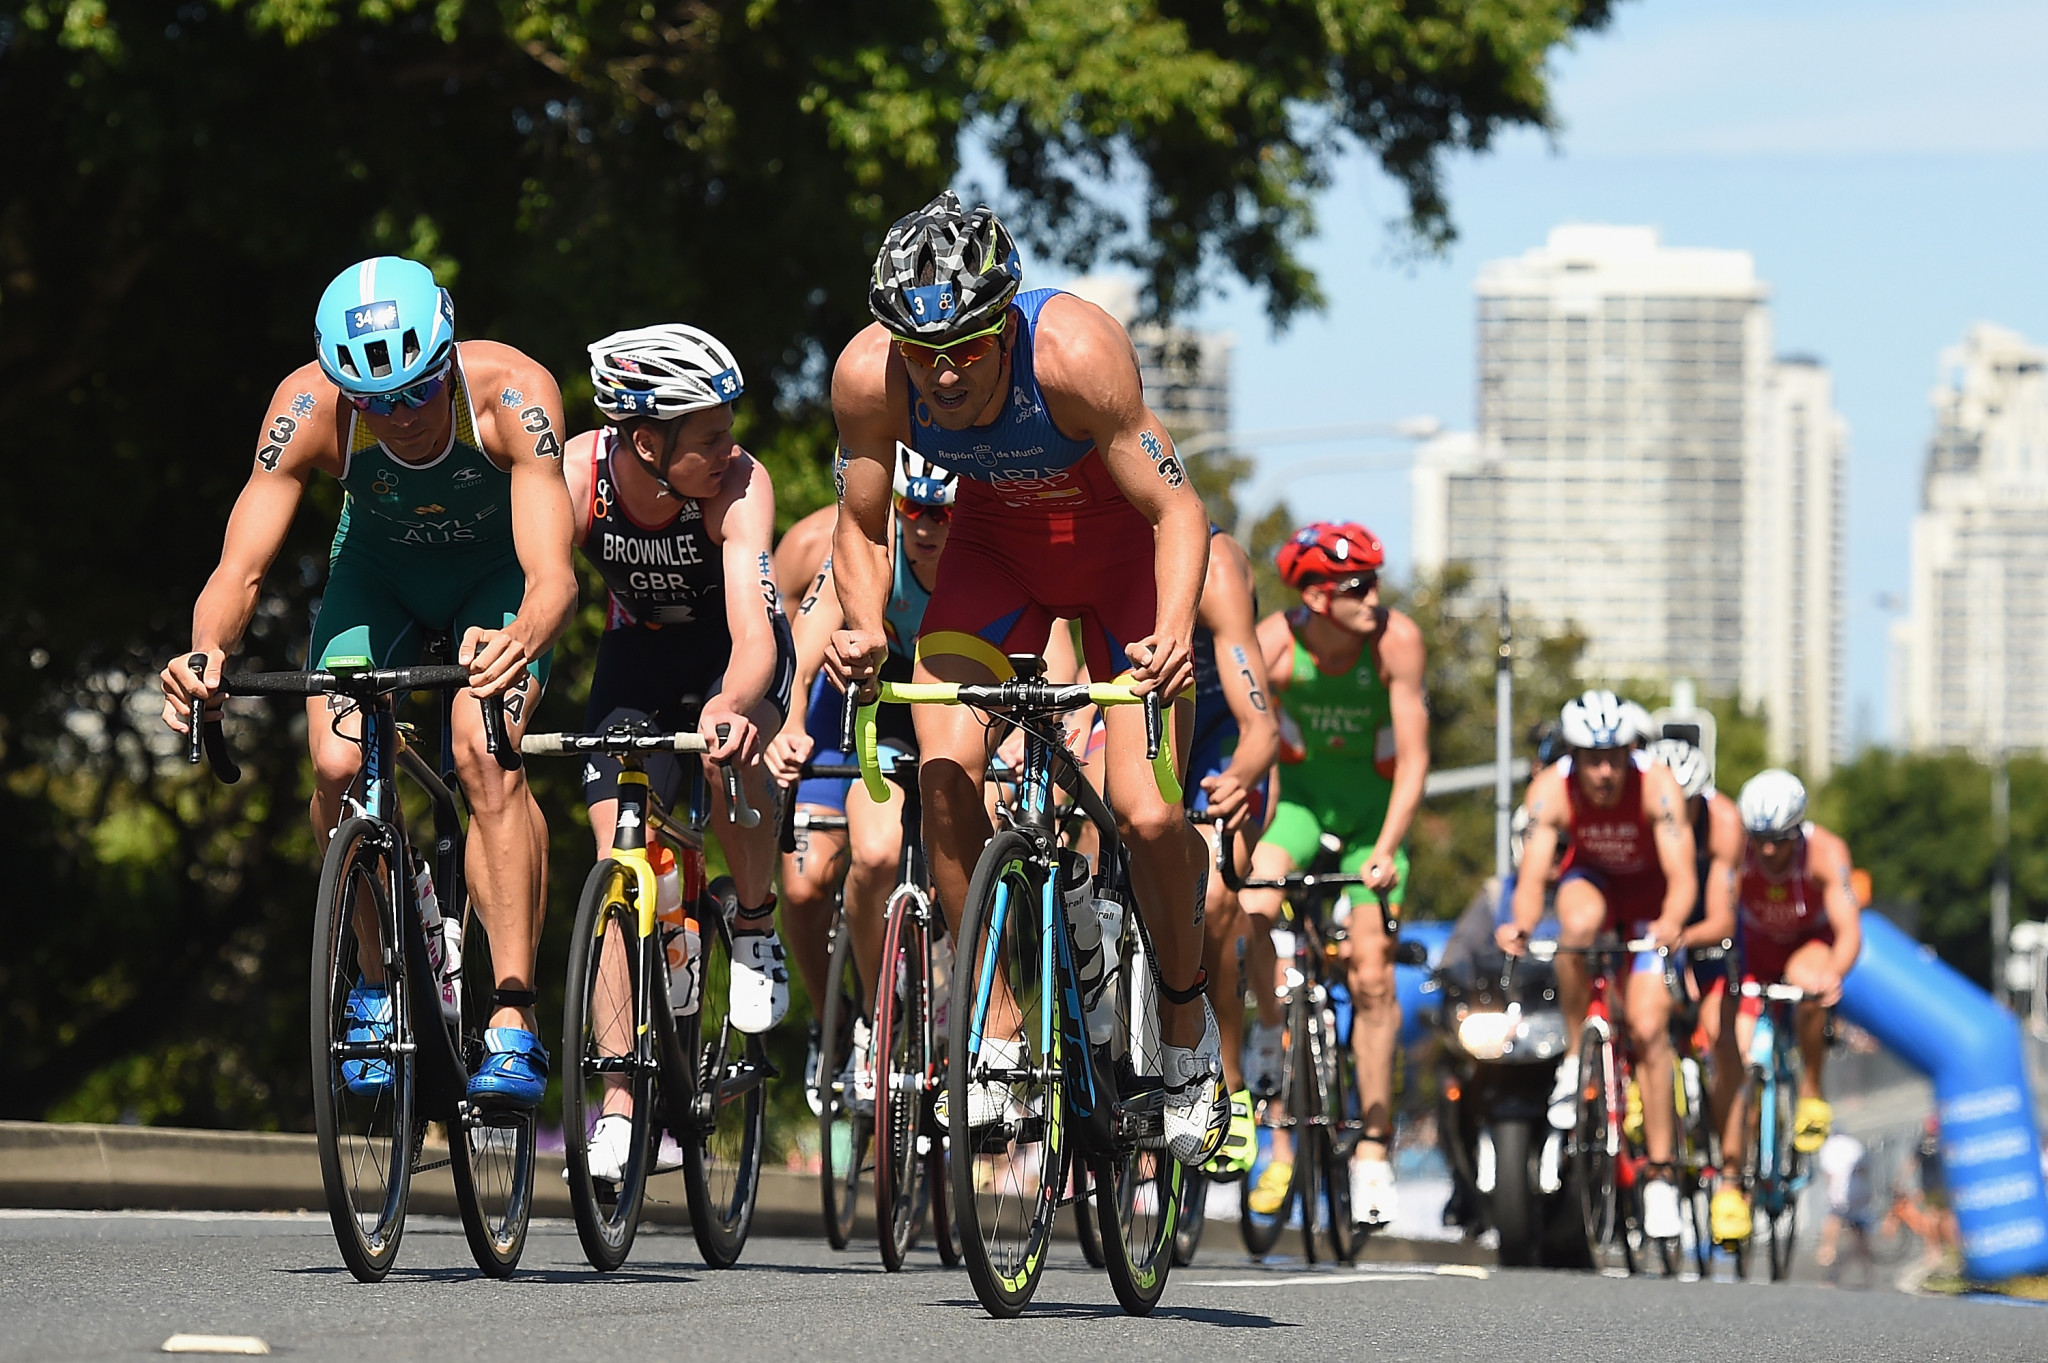 The World Triathlon Series will conclude in Gold Coast ©Getty Images